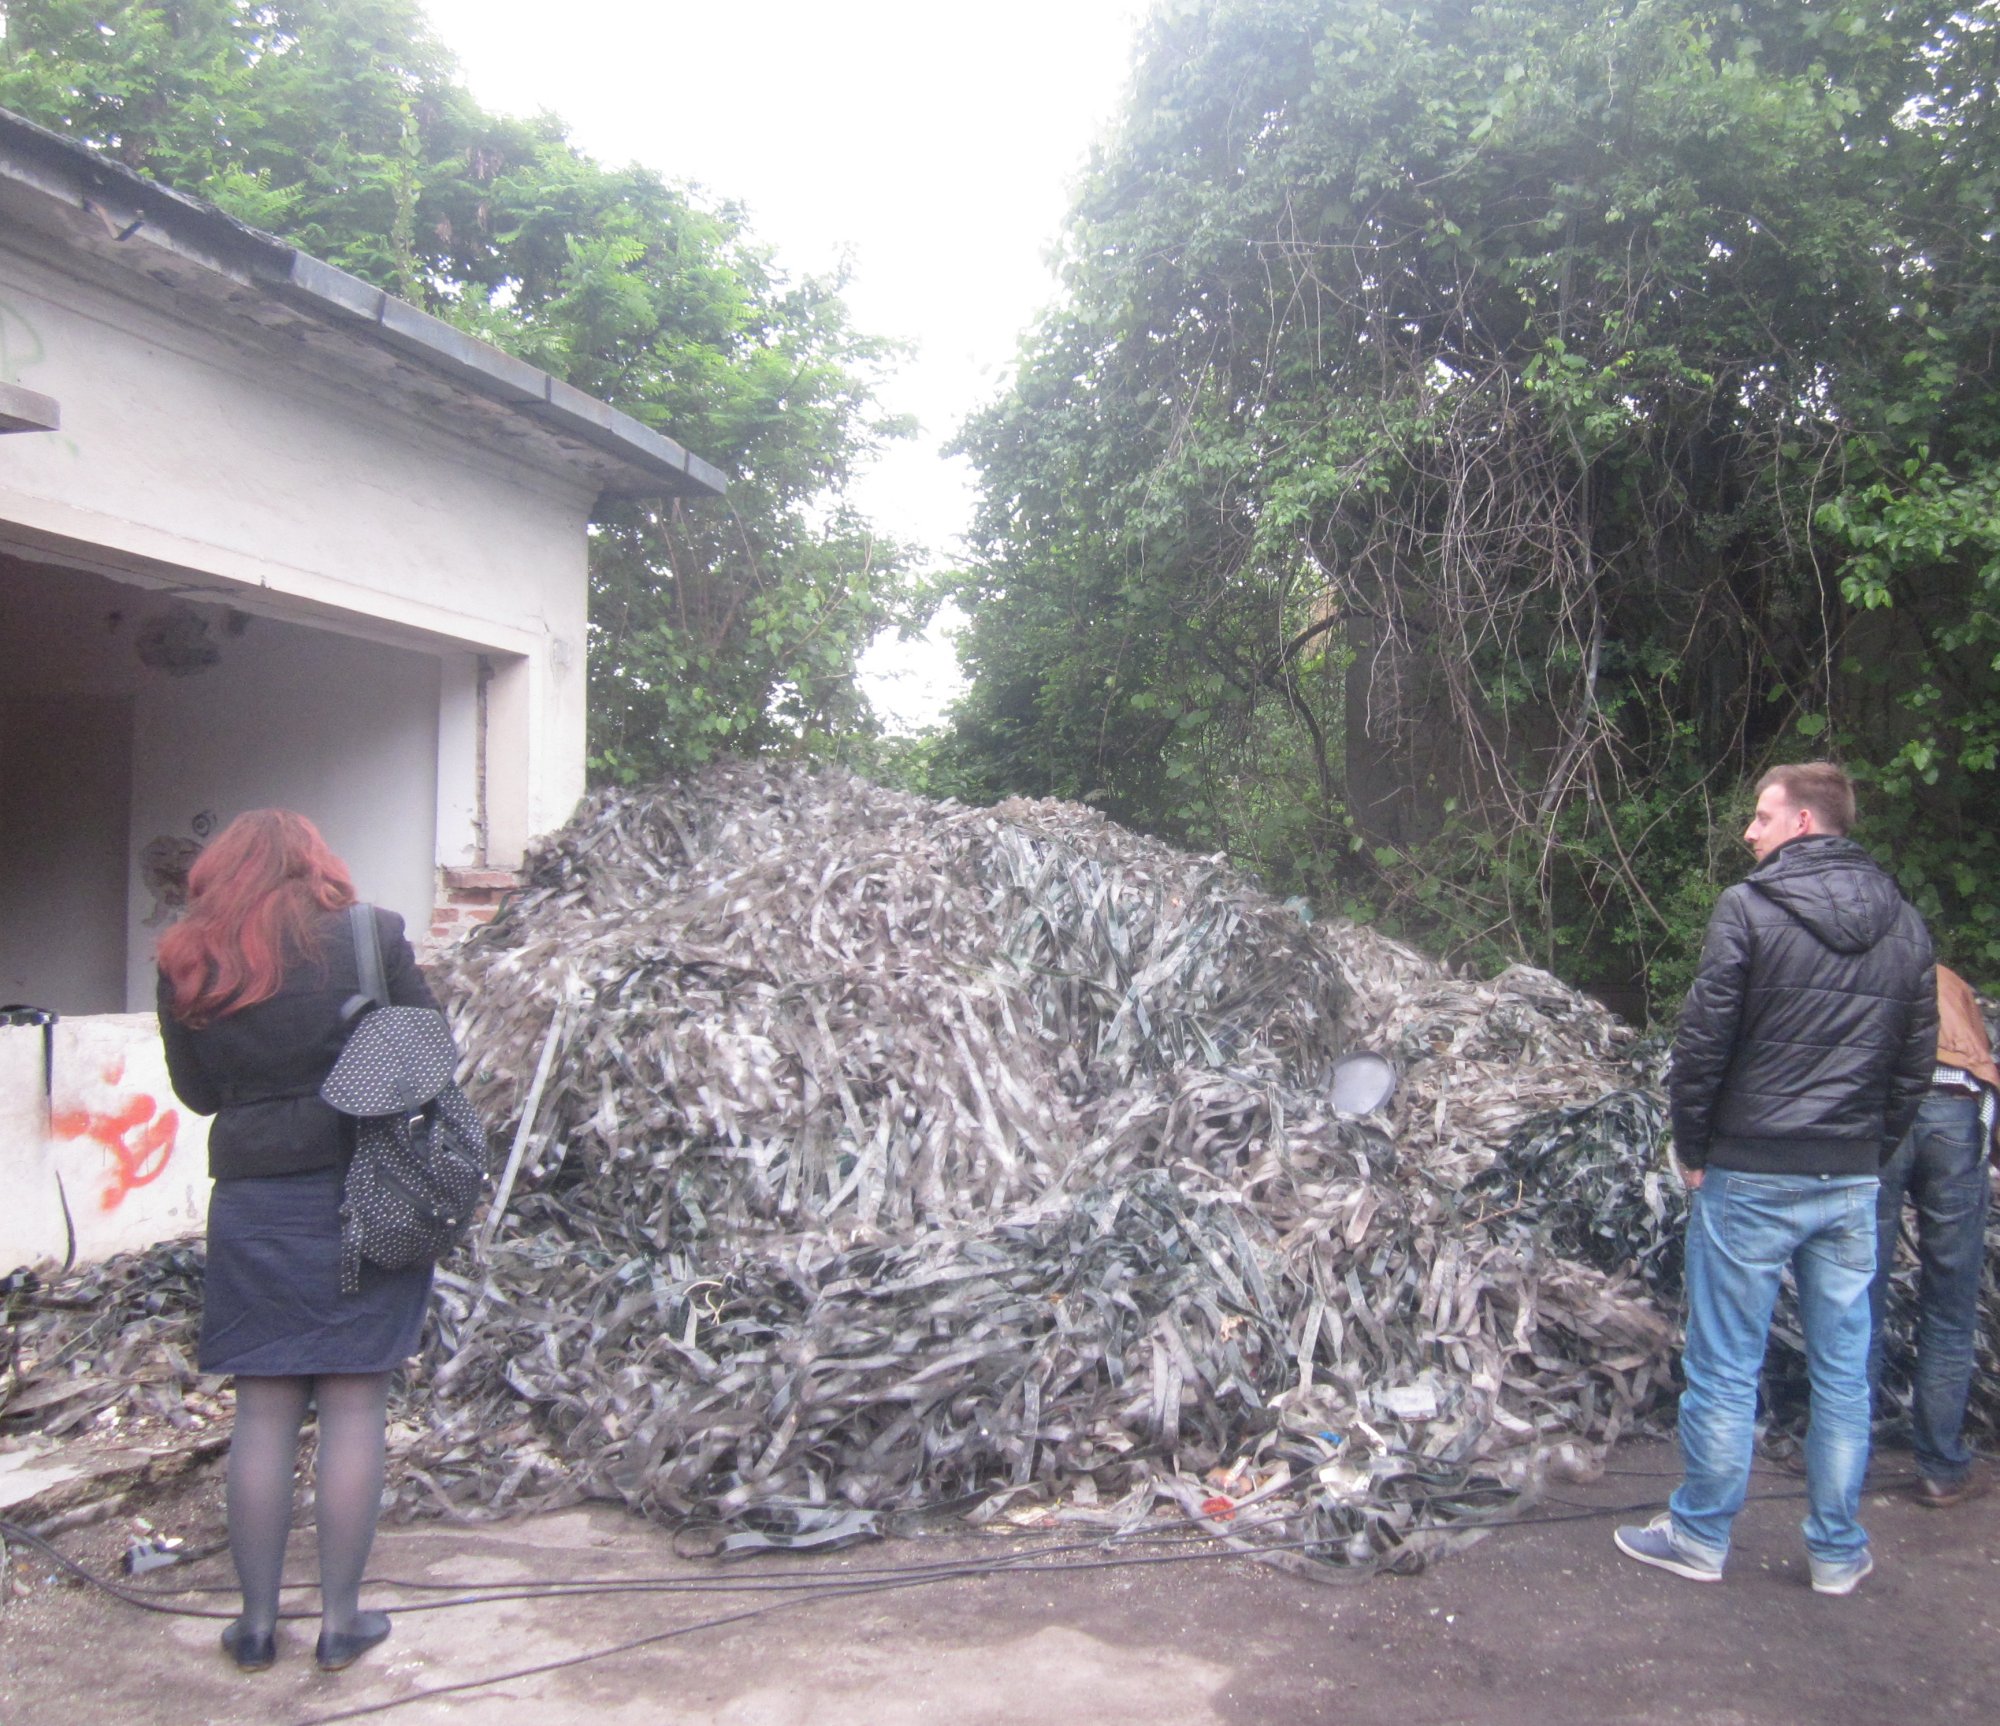 The remains of the Cluj Film Archive